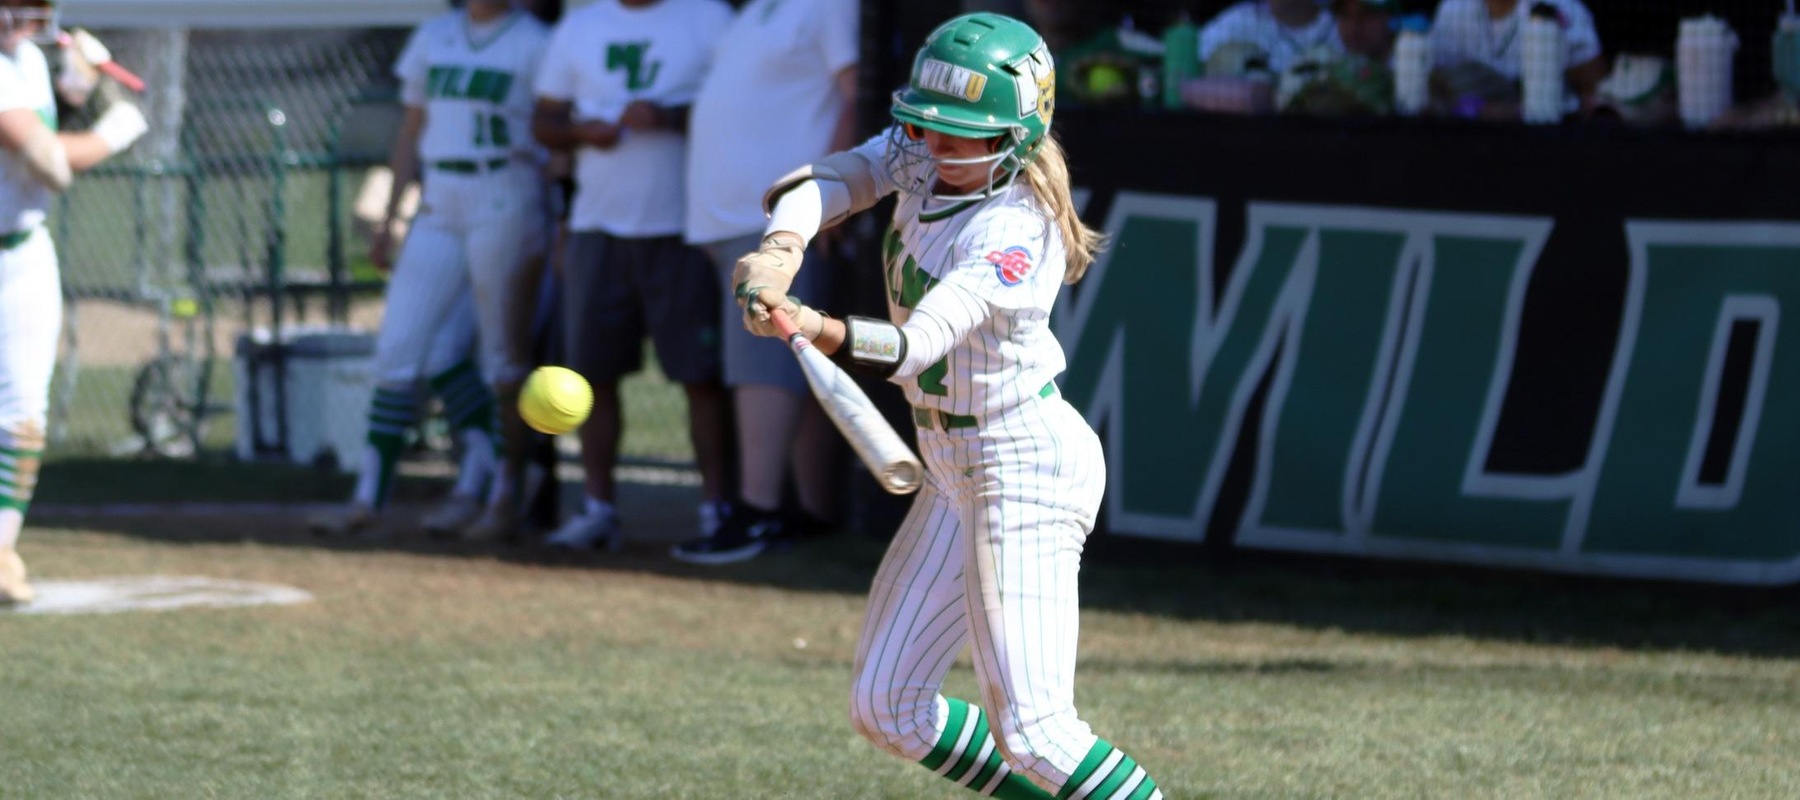 File photo of Lexi Moore who batted 4-for-8 with 3 stolen bases and 5 runs scored at Bloomfield. Copyright 2023; Wilmington University. All rights reserved. Photo by Dan Lauletta. April 4, 2023 vs. Jefferson.